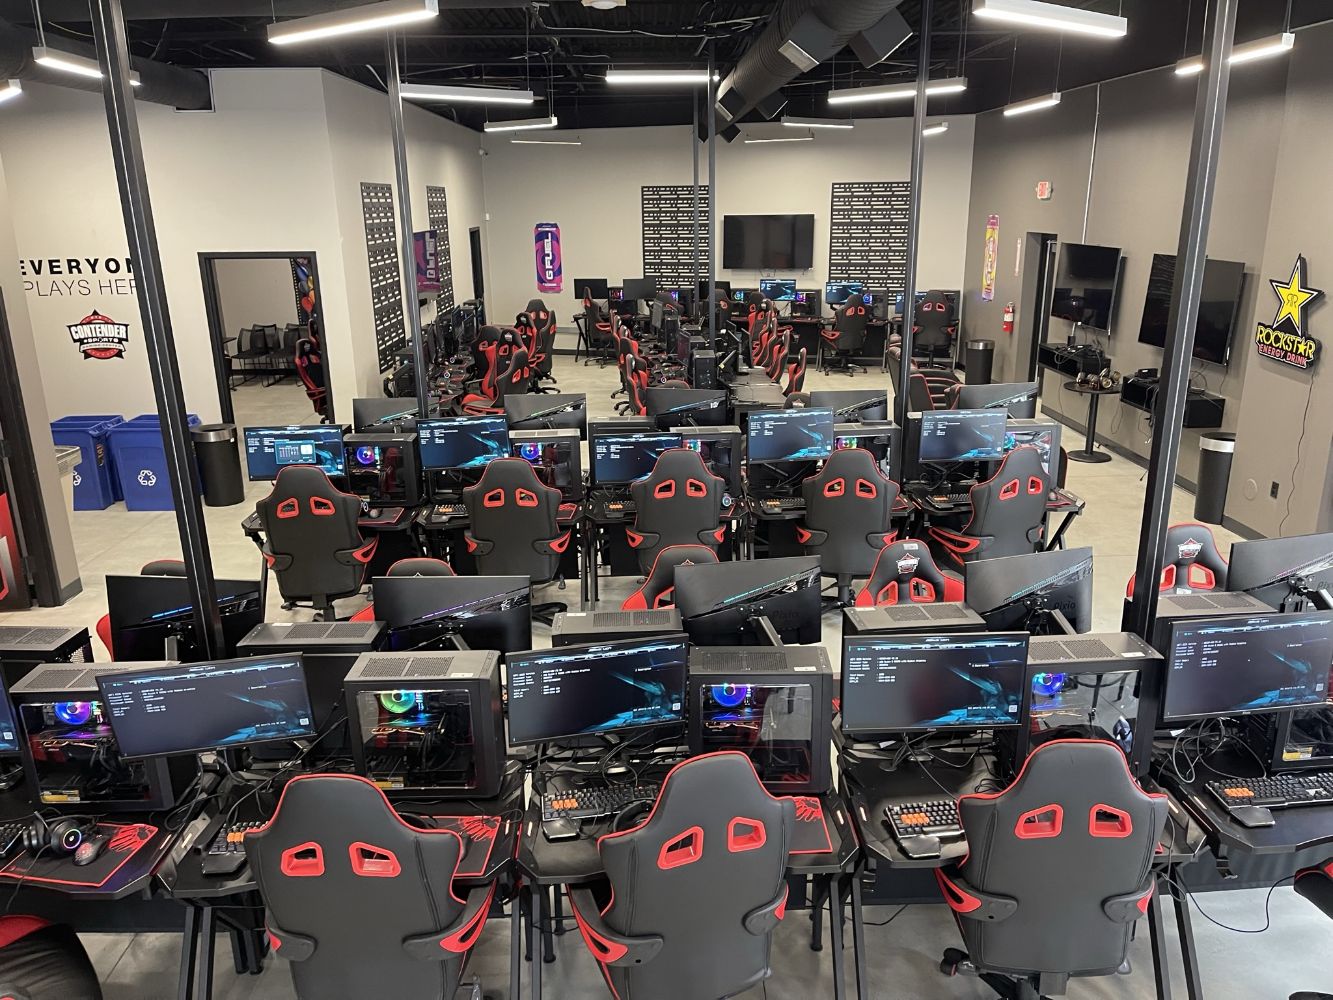 Computer Gaming Center - Former Contender Esports w/ PC's Gaming PC's, Desks, Chairs, TV's, Only Open For 120 Day Before Closing Like New Equip